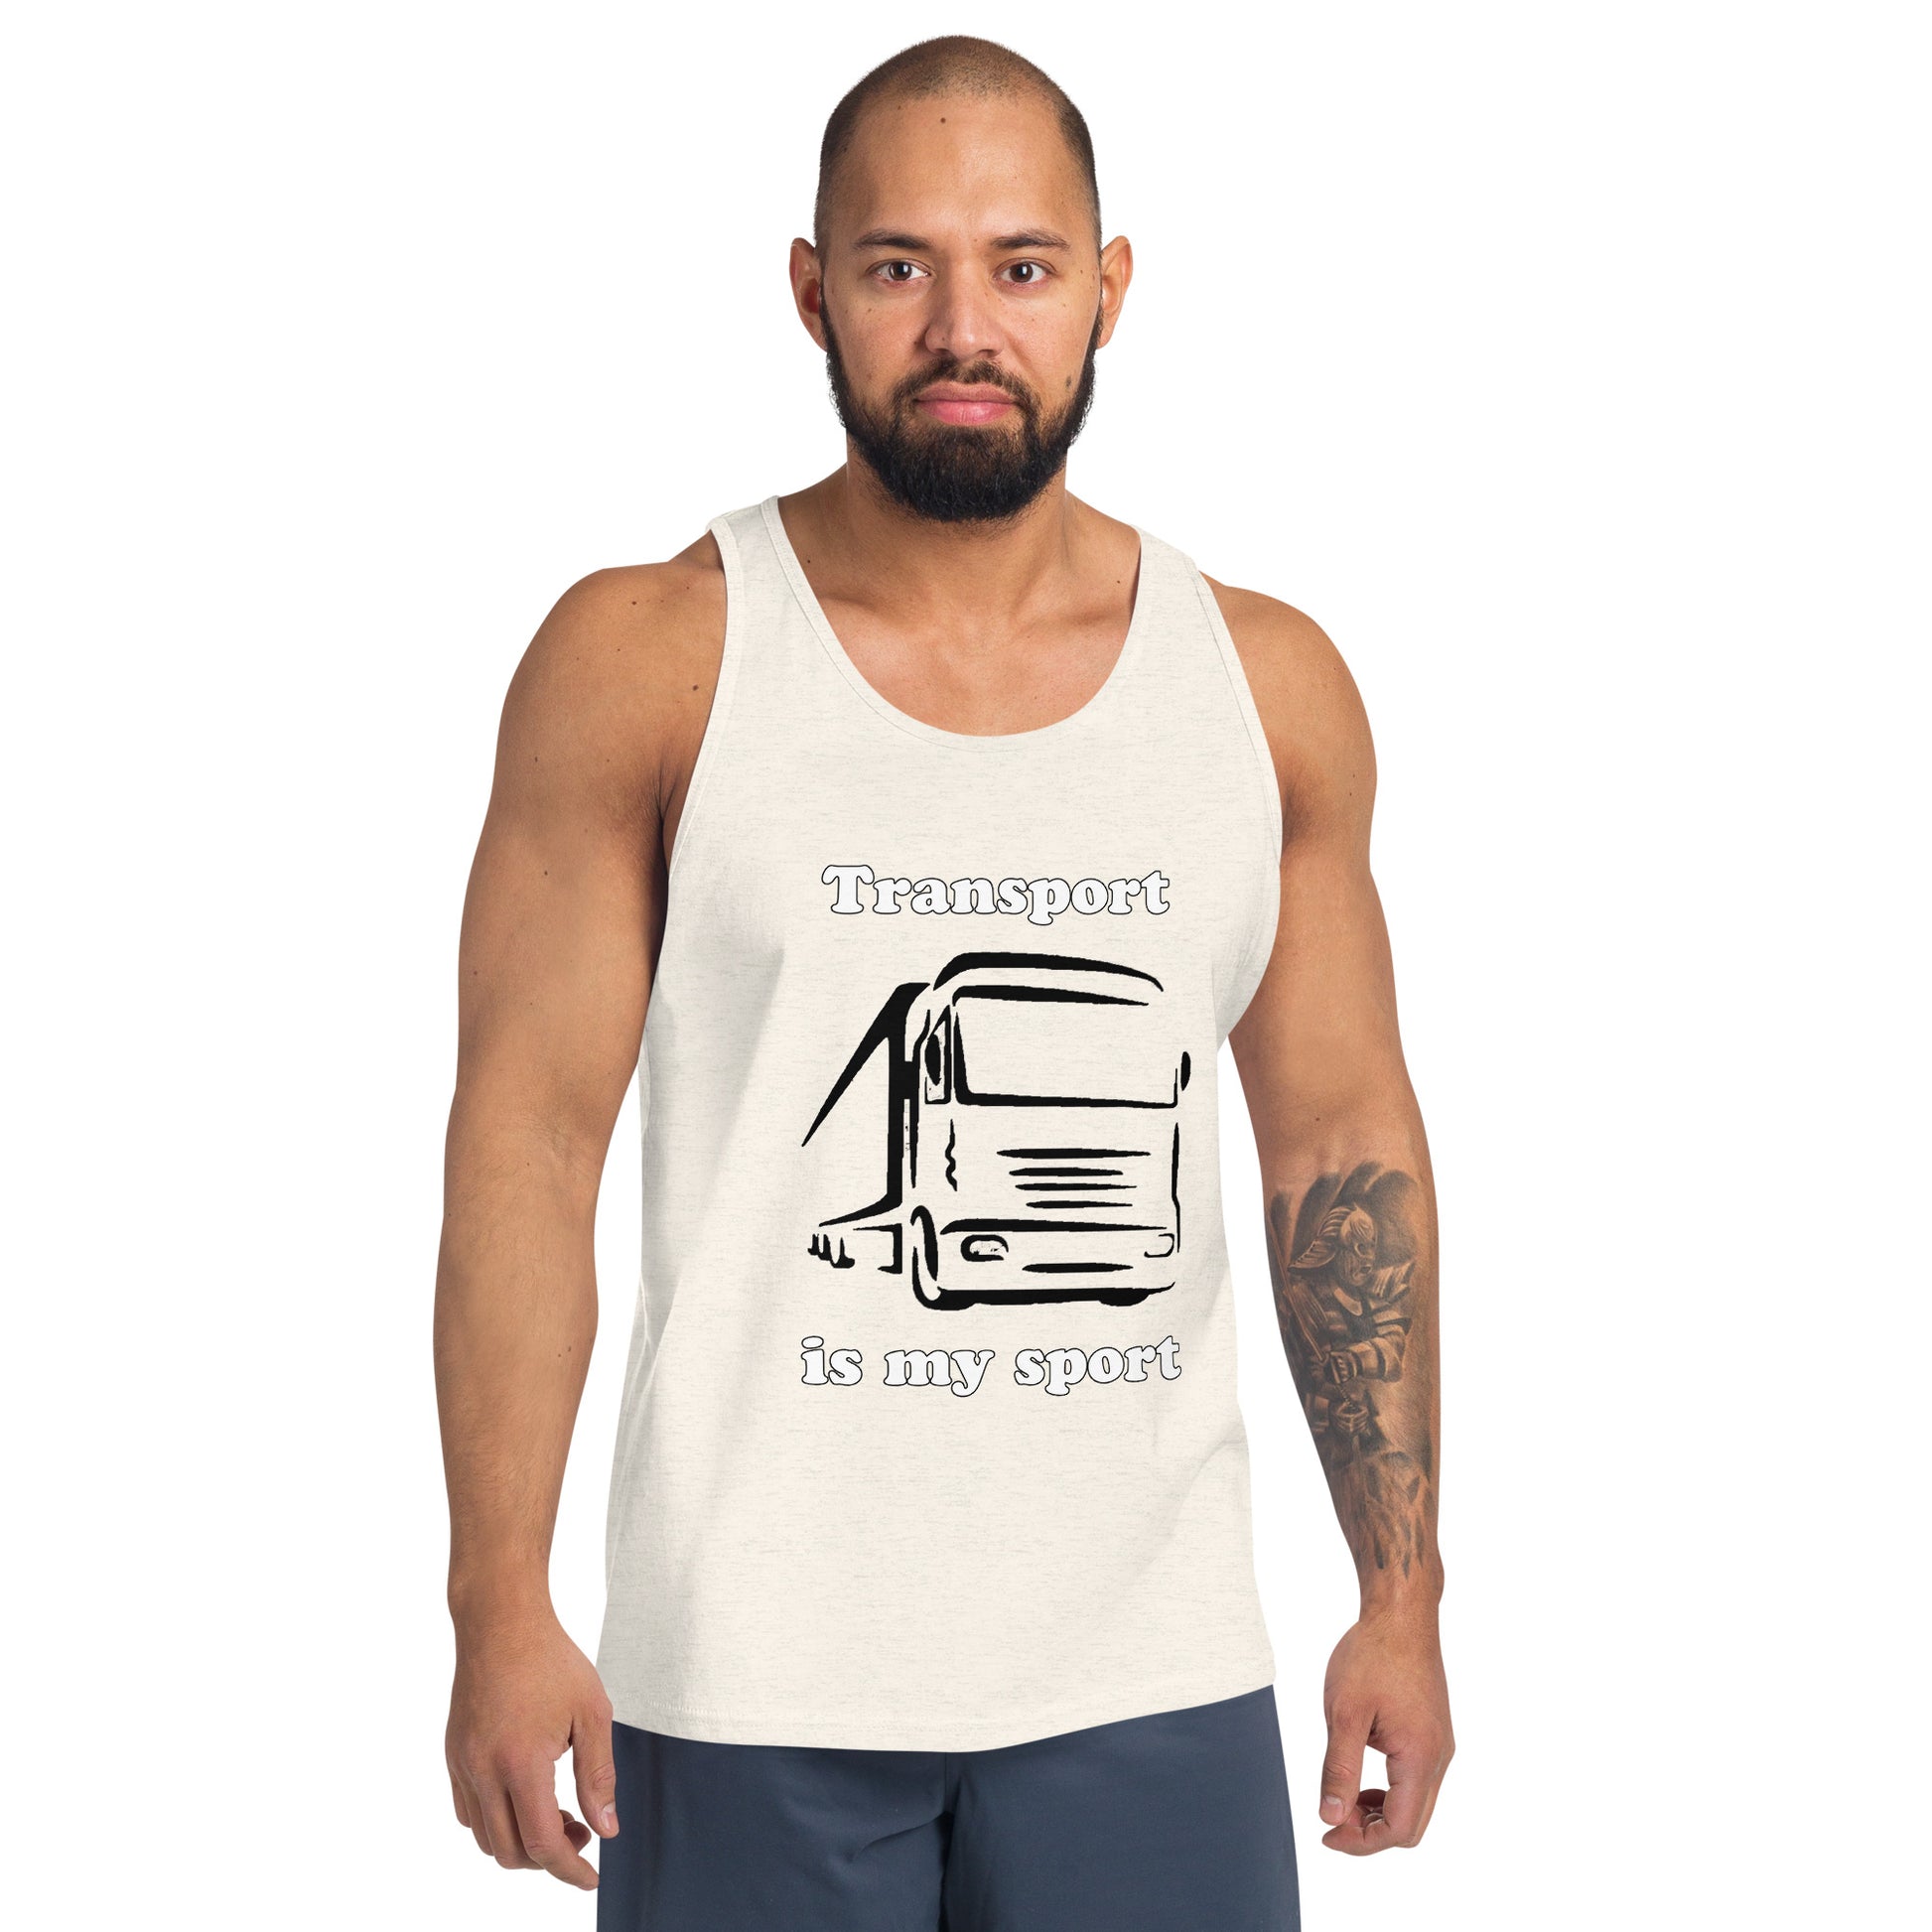 Man with oatmeal tank top with picture of truck and text "Transport is my sport"